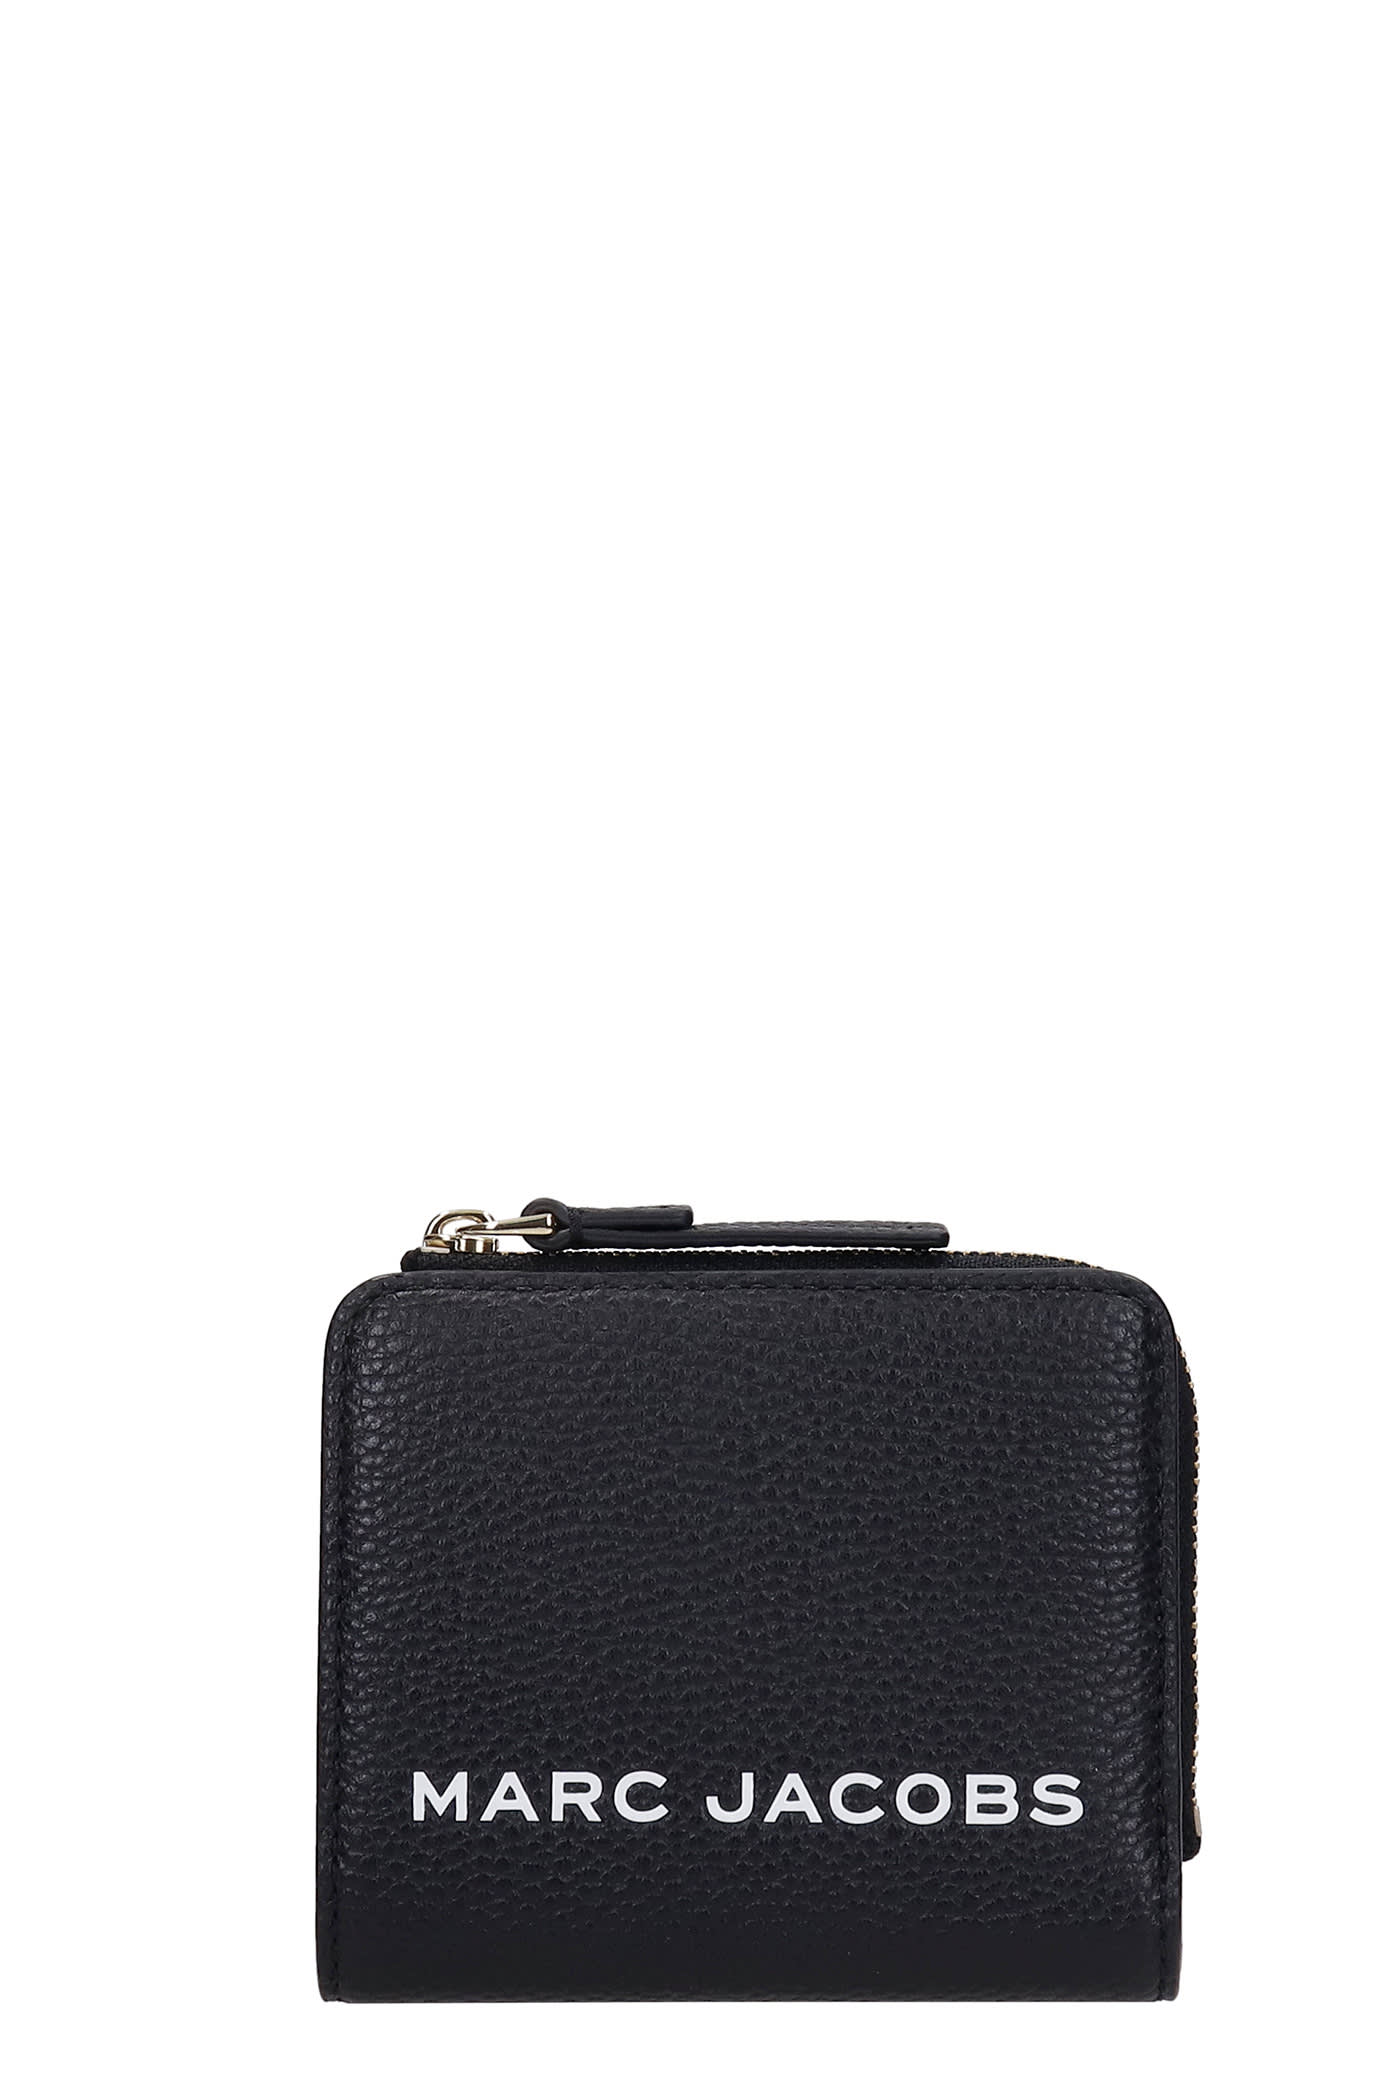 Marc Jacobs Wallet In Black Leather